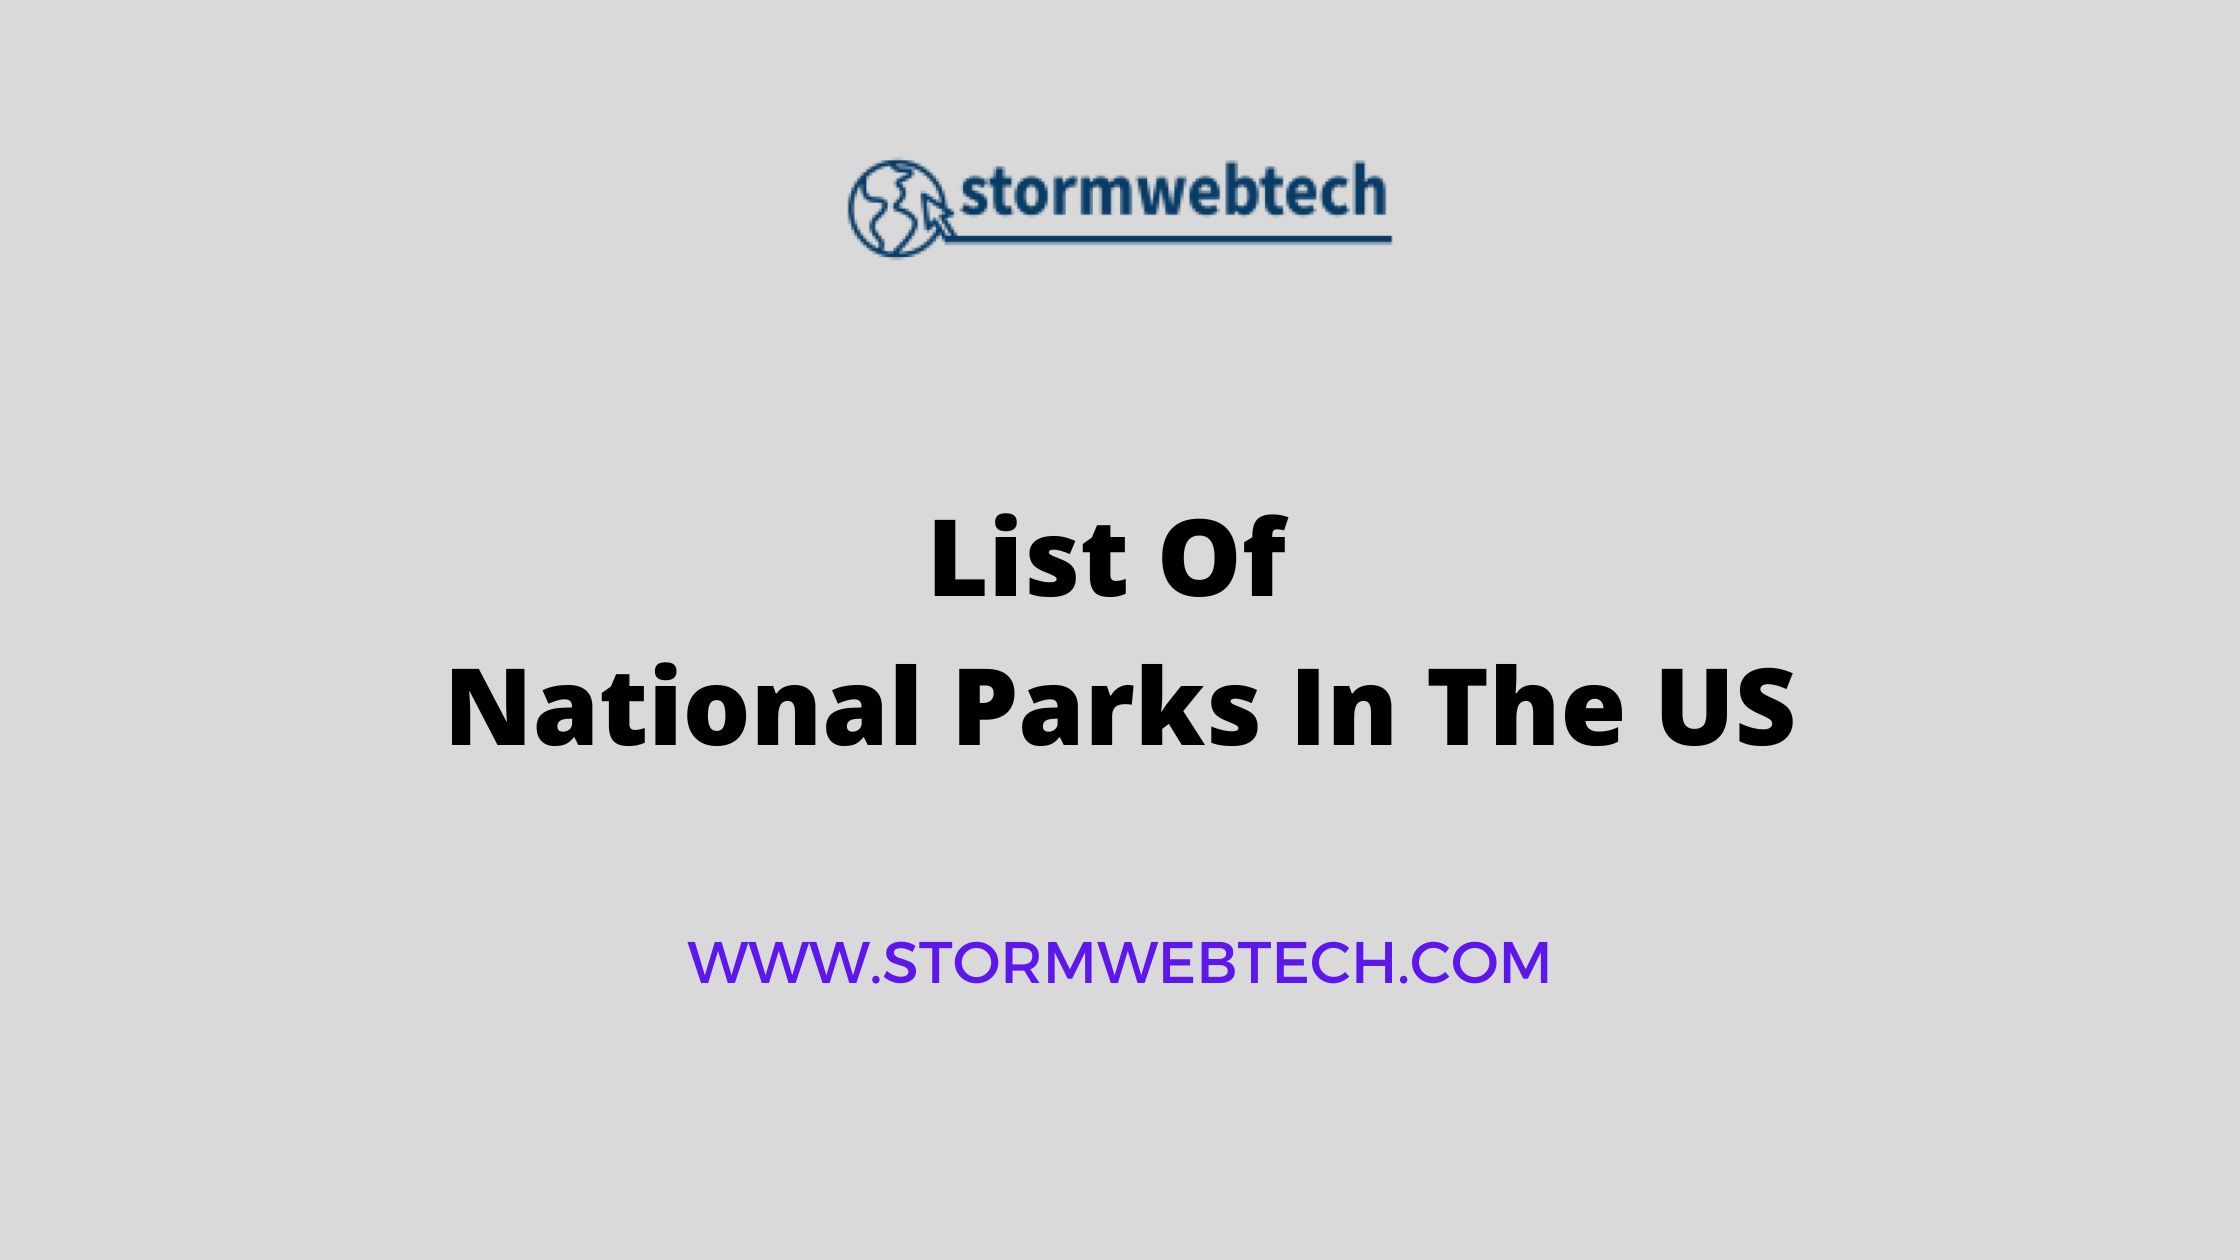 List Of National Parks In The US, US National Parks List, List Of All National Parks In USA, All US National Parks List, List Of All US National Parks